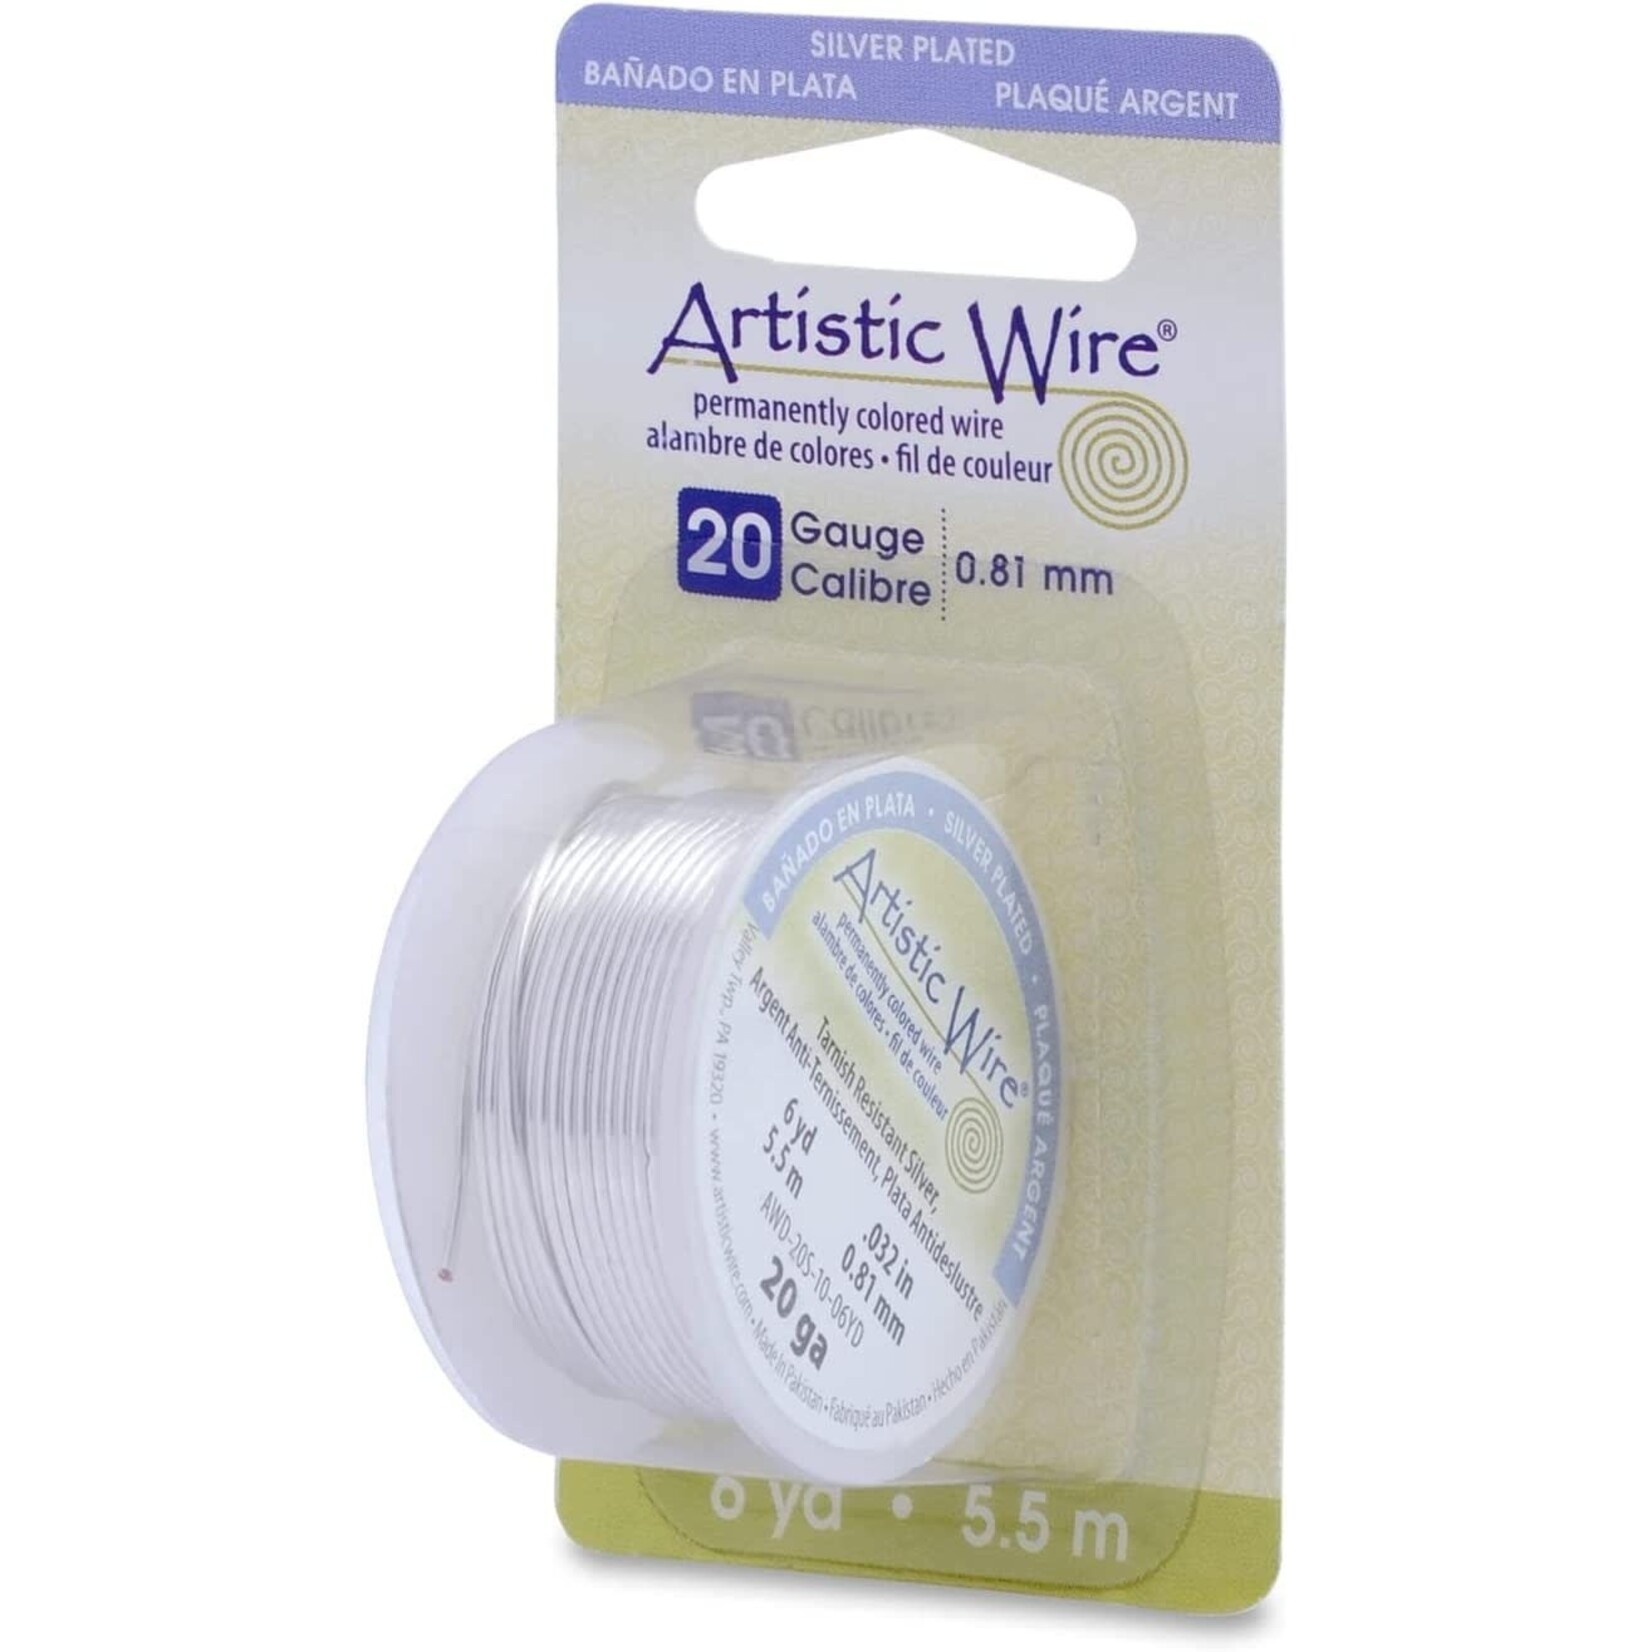 Artistic Wire Artistic Wire Tarnish Resistant Silver, 20 Gauge, 6 Yard Spool